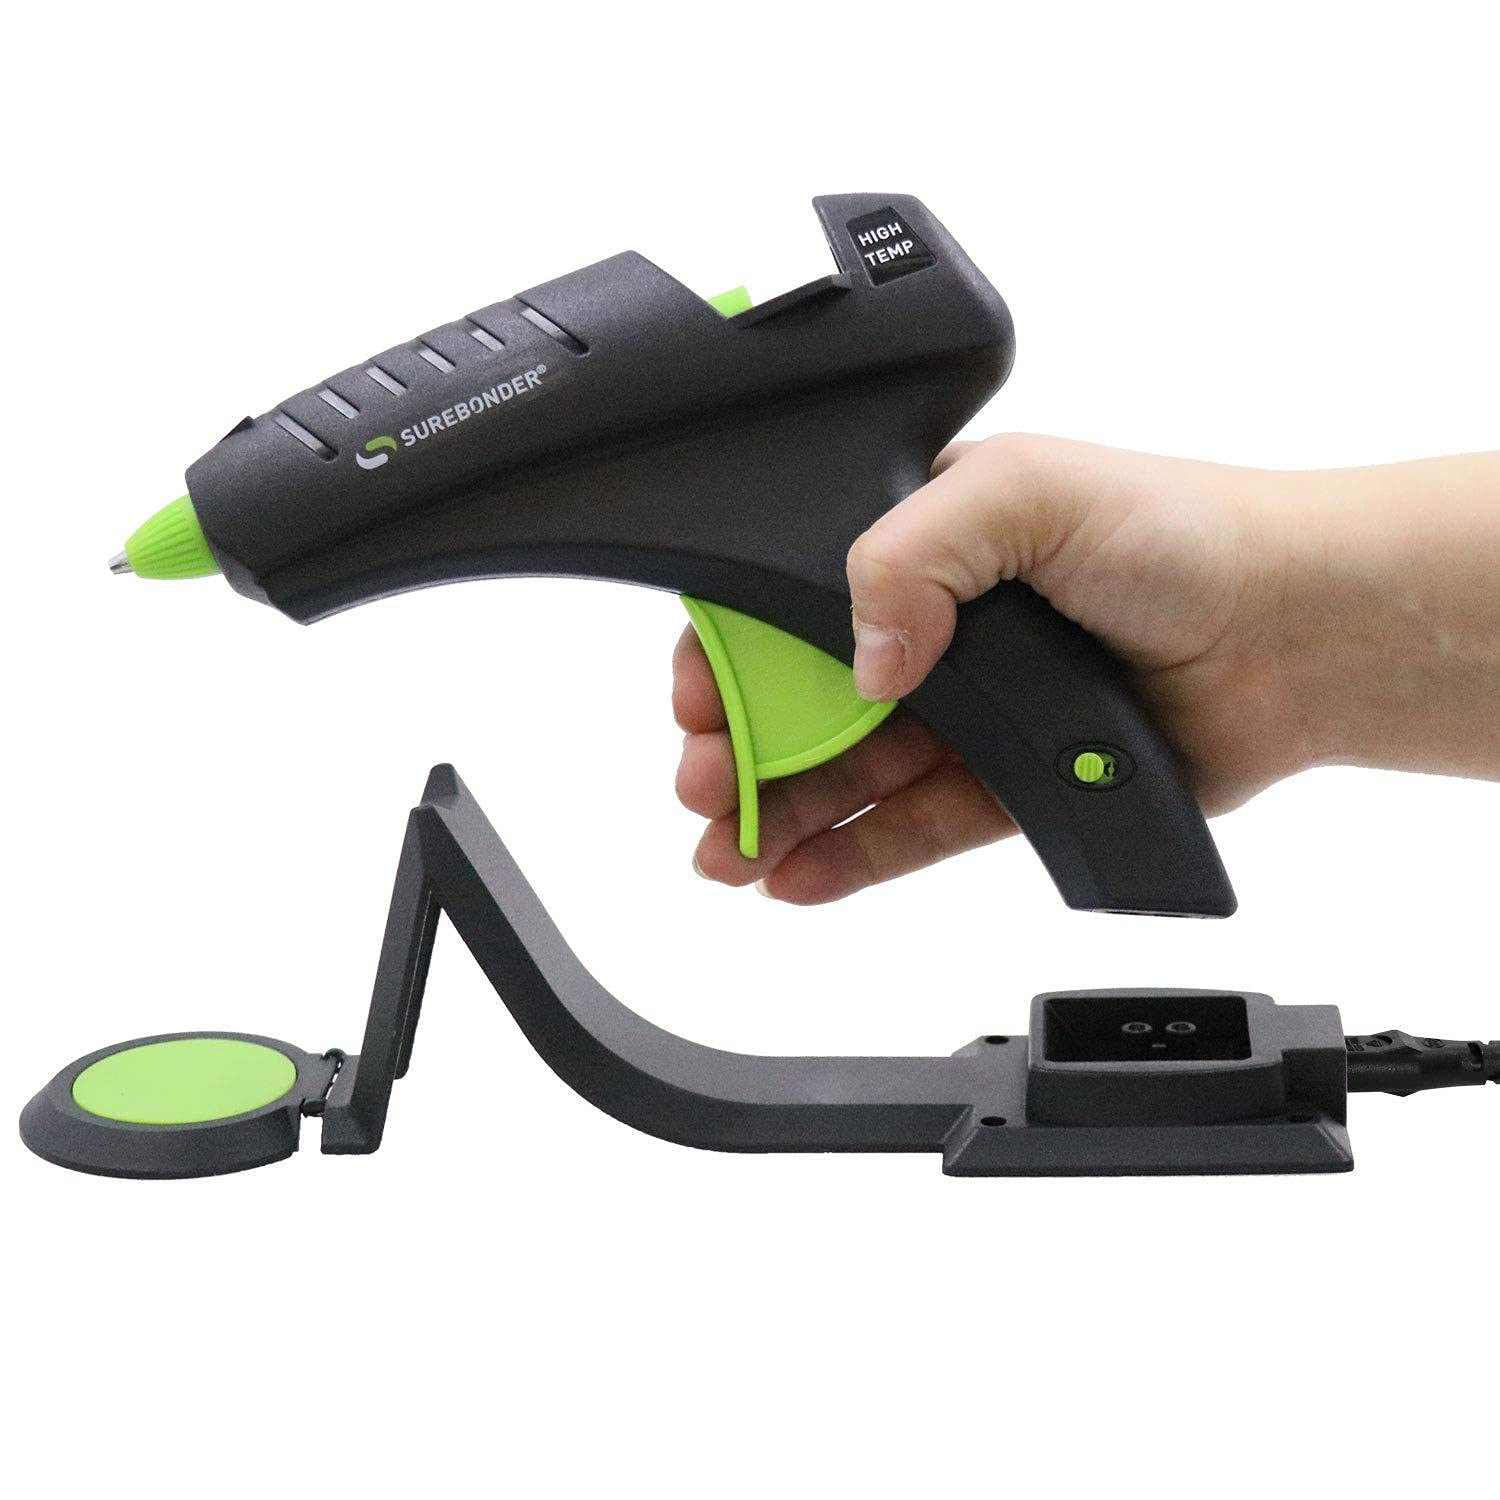 Surebonder Cordless Hot Glue Gun High Temperature Full Size 60W 50% More  Power - Sturdily Bonds Metal Wood Ceramics Leather & Other Strong Materials  (Specialty Series CL-800F)